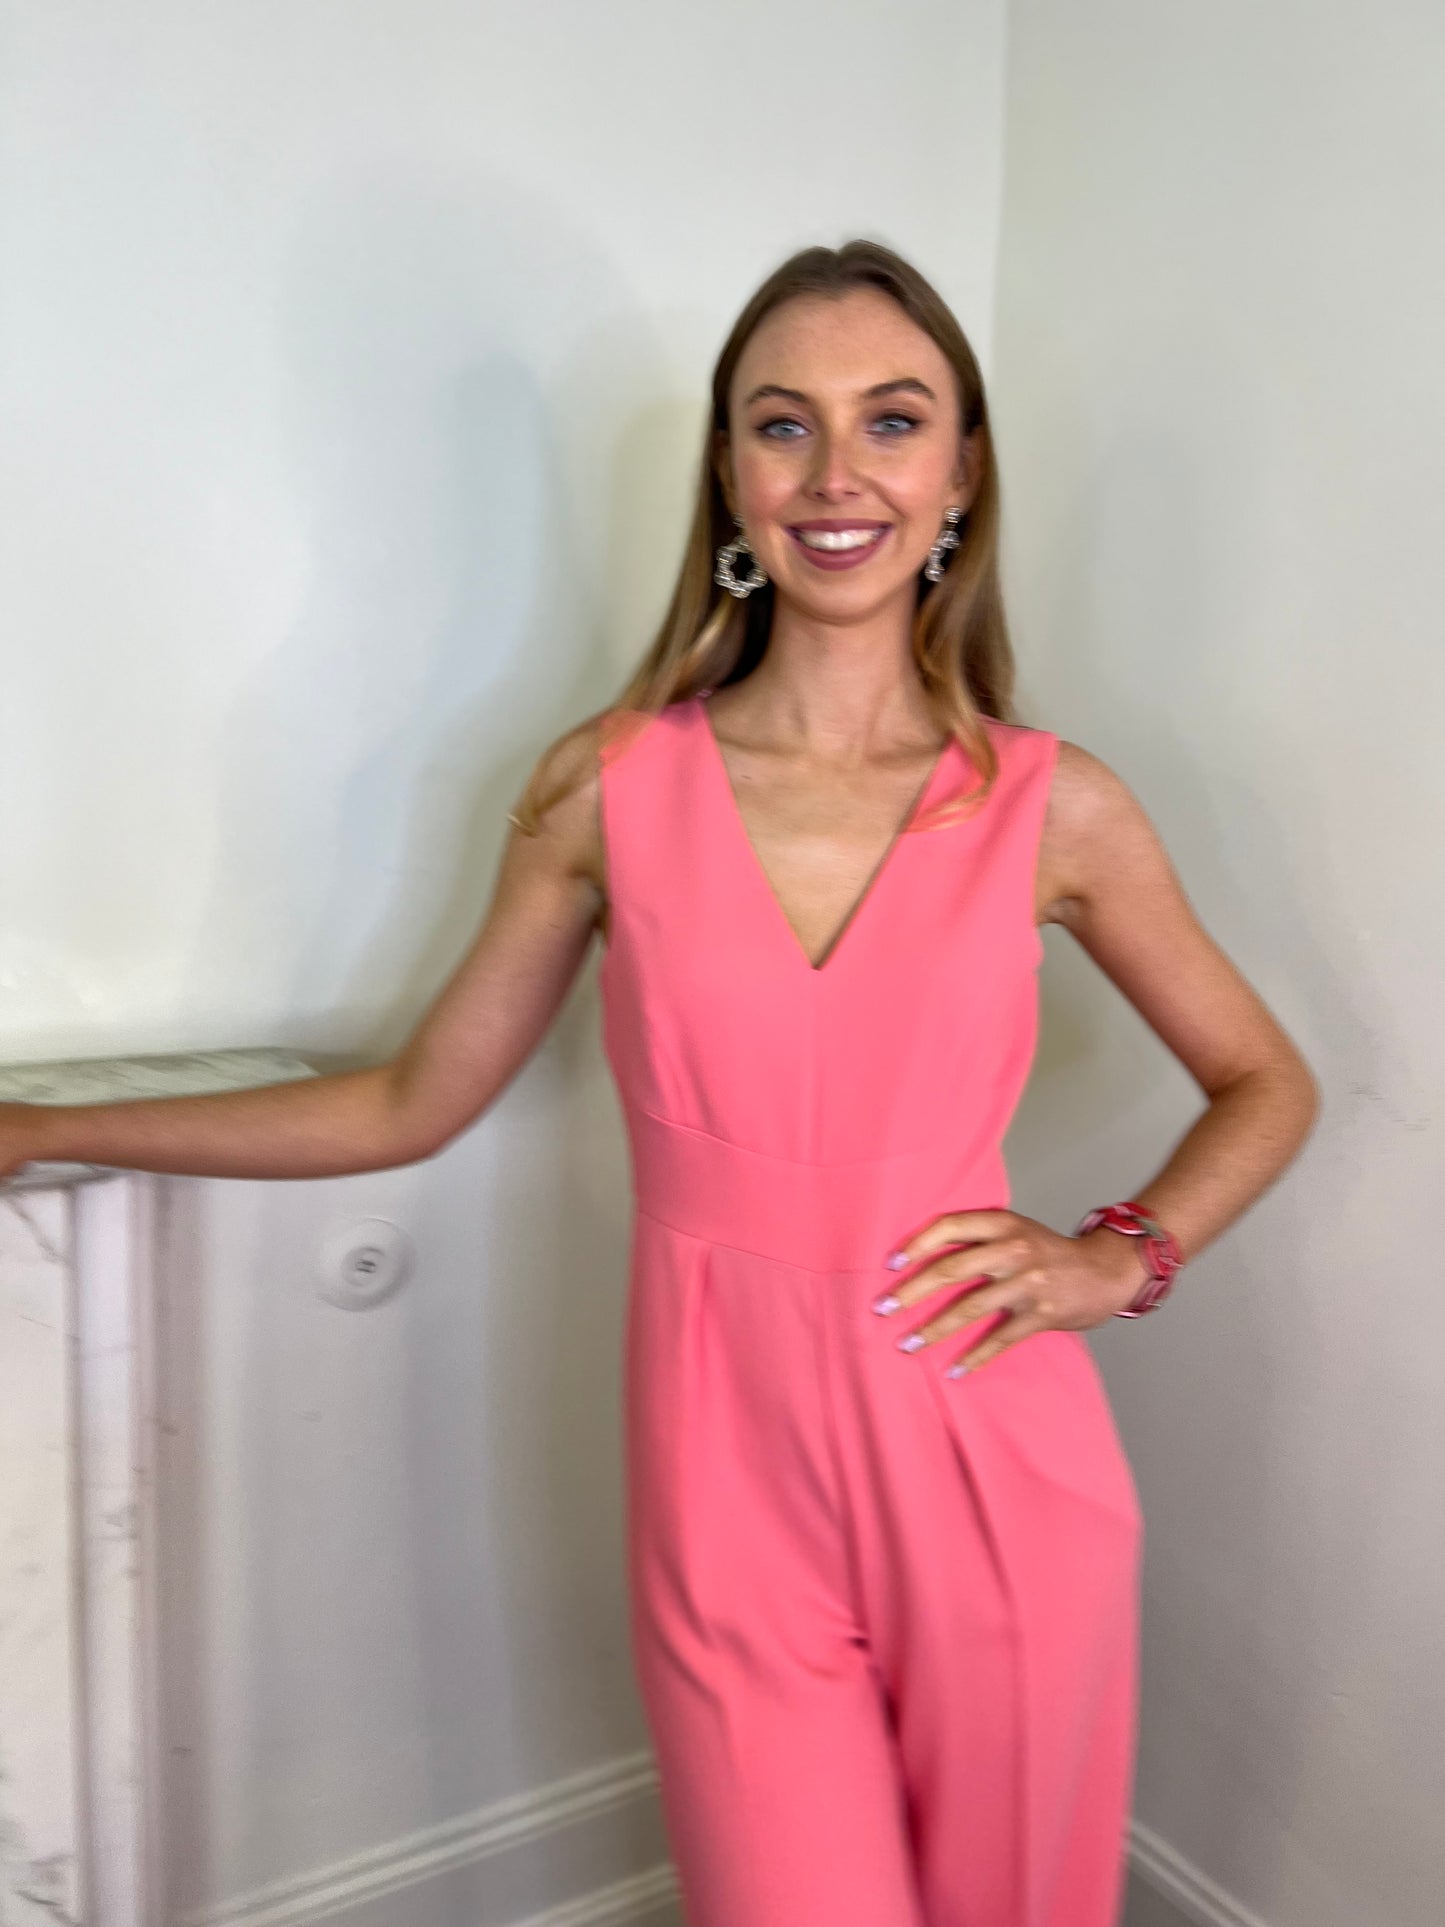 Coral Pink Sleeveless Jumpsuit